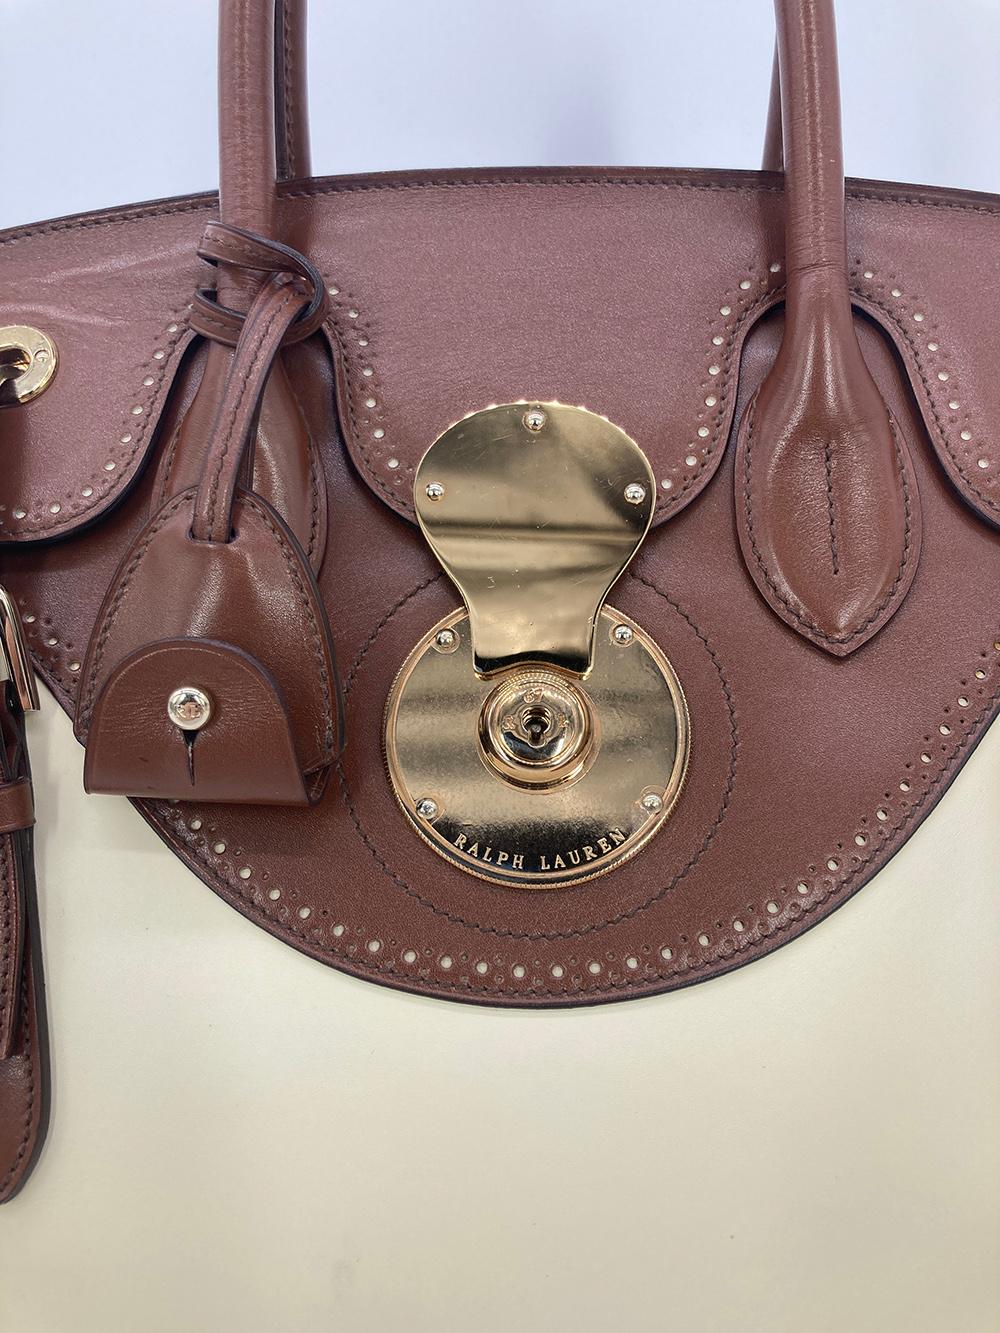 Ralph Lauren Cream and Brown Leather Rickey Bag In Good Condition For Sale In Philadelphia, PA